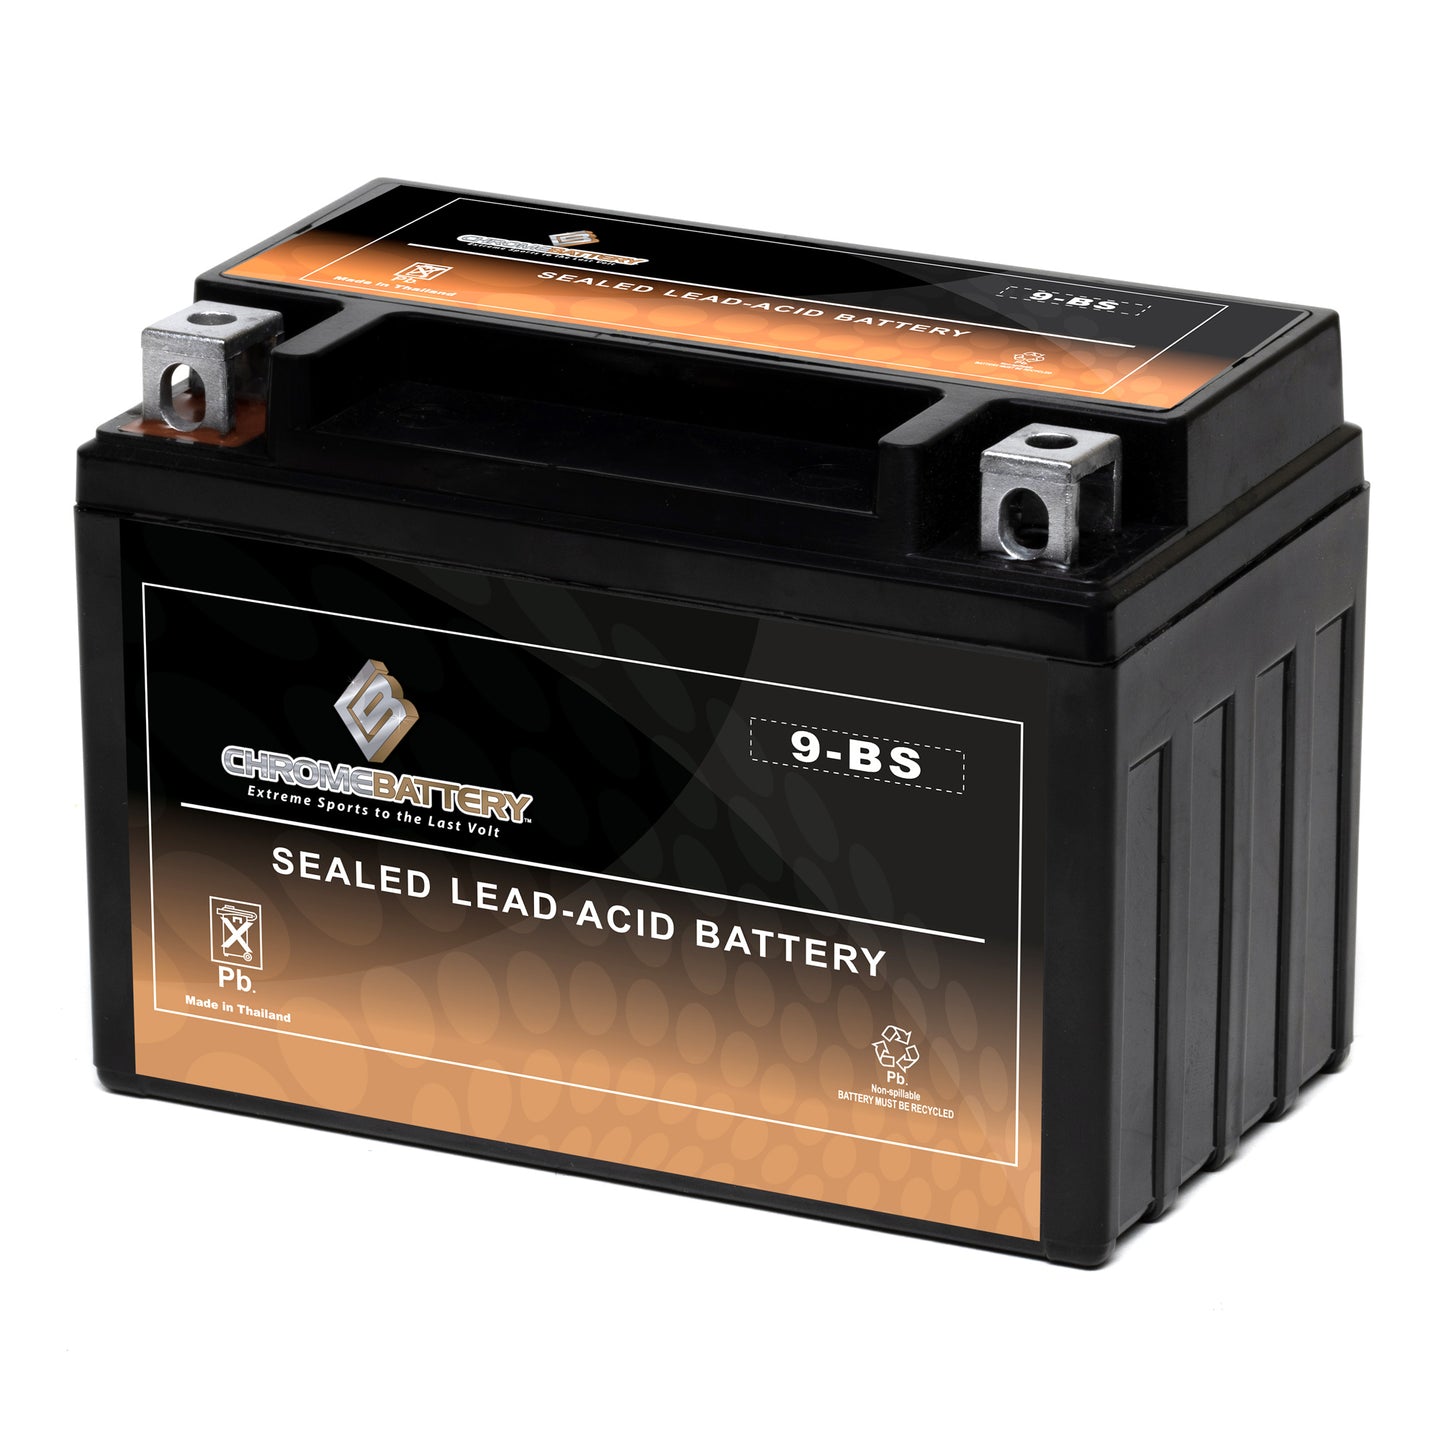 YTX9-BS High Performance Power Sports Battery